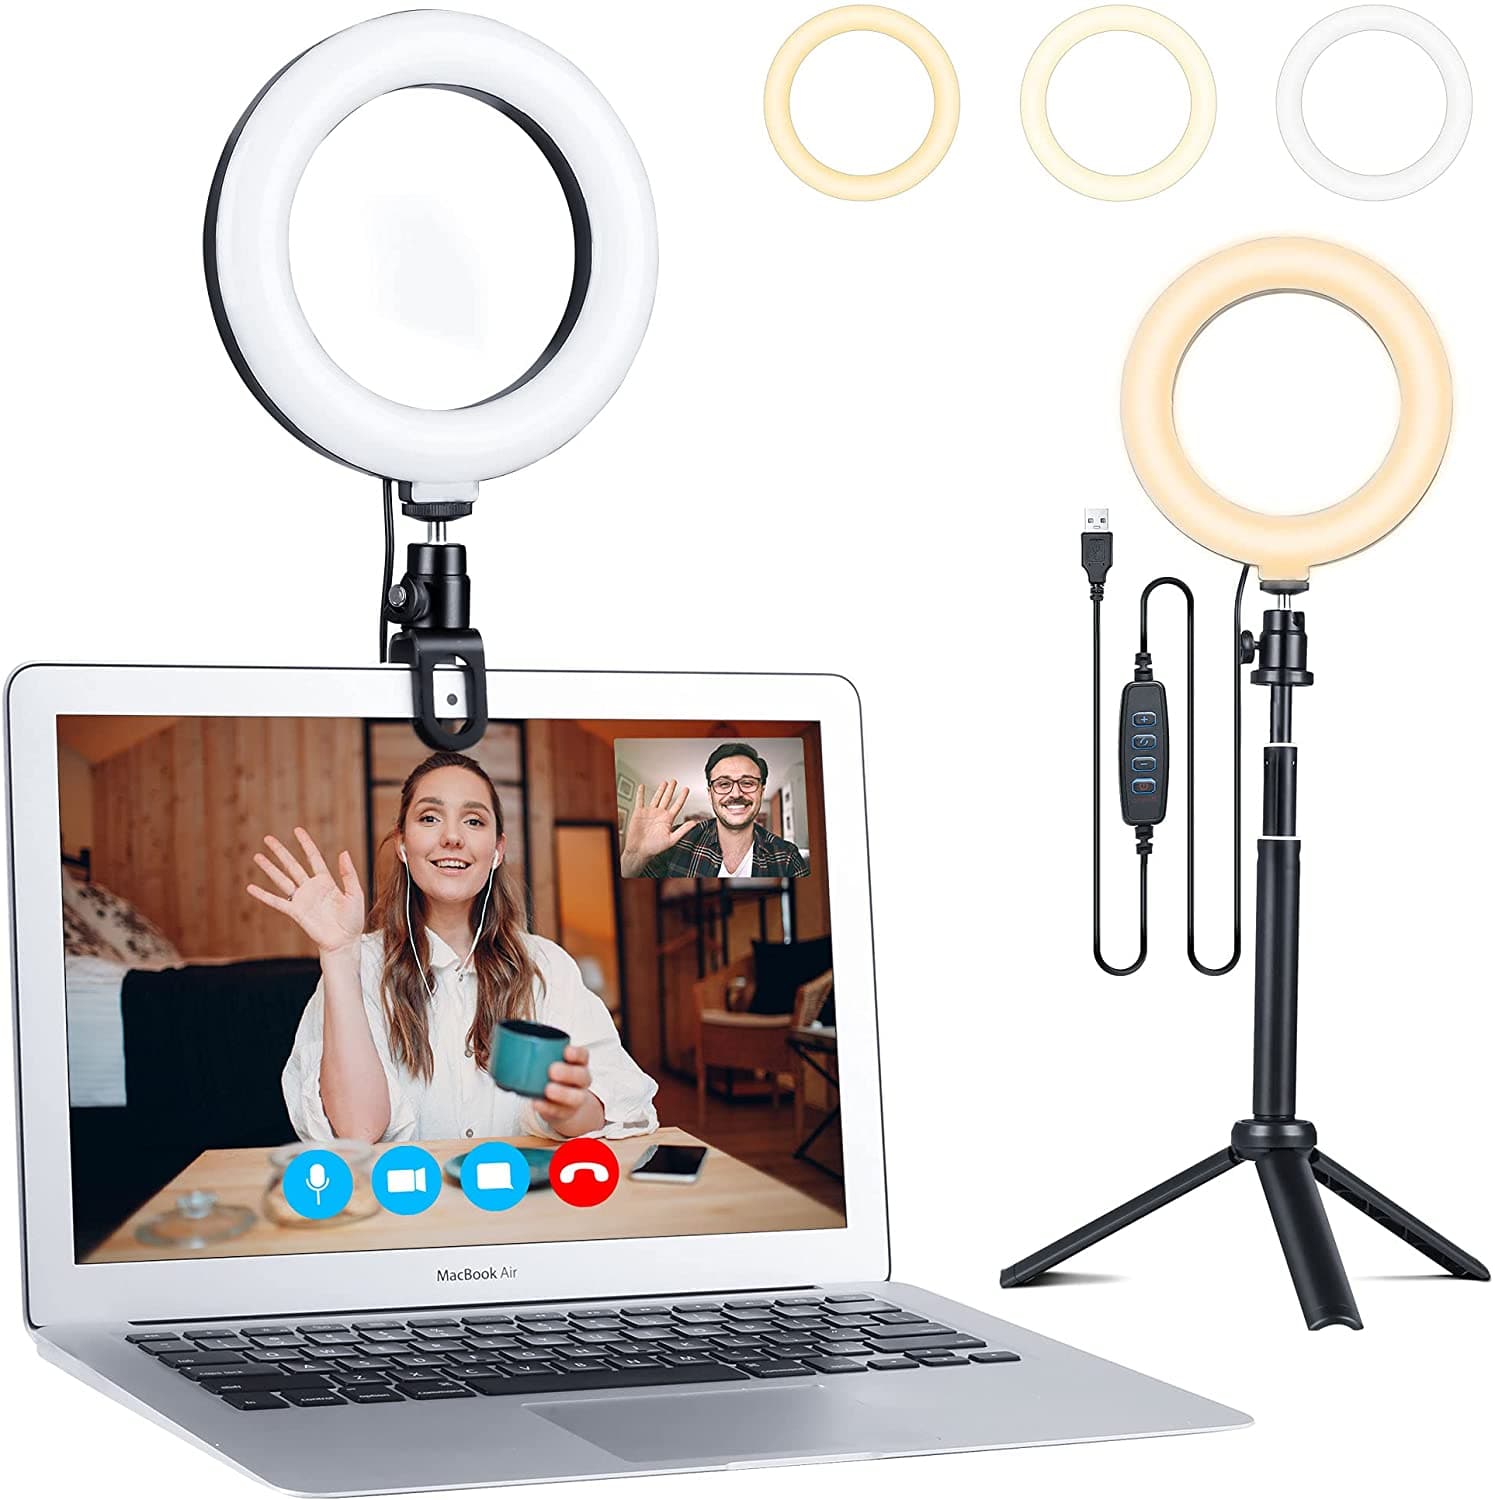 6'' Powerful Tricolor Dimming Laptop Ring Light for Video Conference, Webcam Lighting/Zoom Lighting/Makeup/Self Broadcasting and Live Streaming